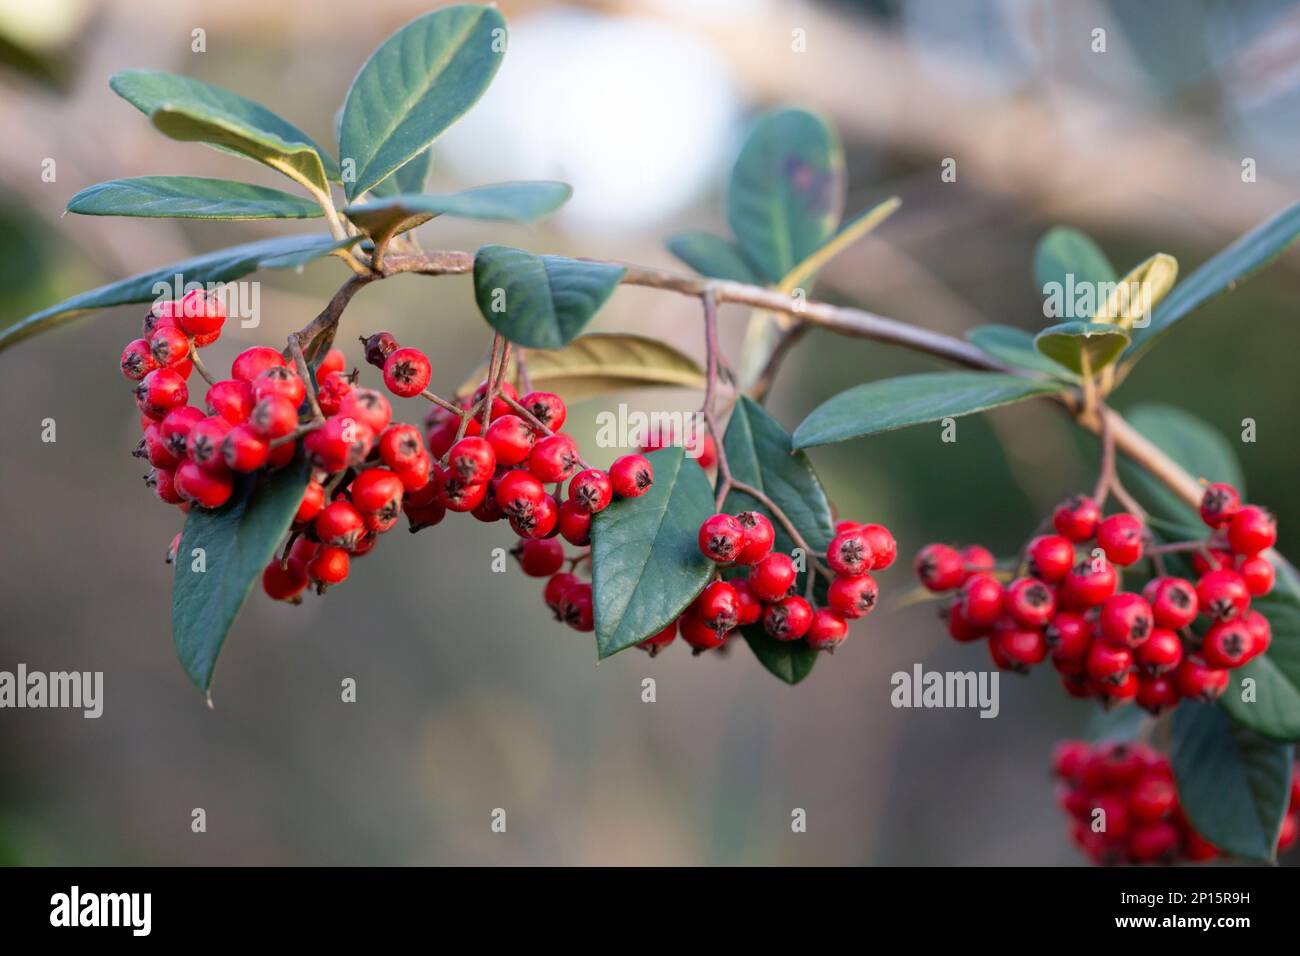 Cotoneaster coriaceus ornamental plant with red fruits and dark green foliage. autumn background with ripe red berries Stock Photo